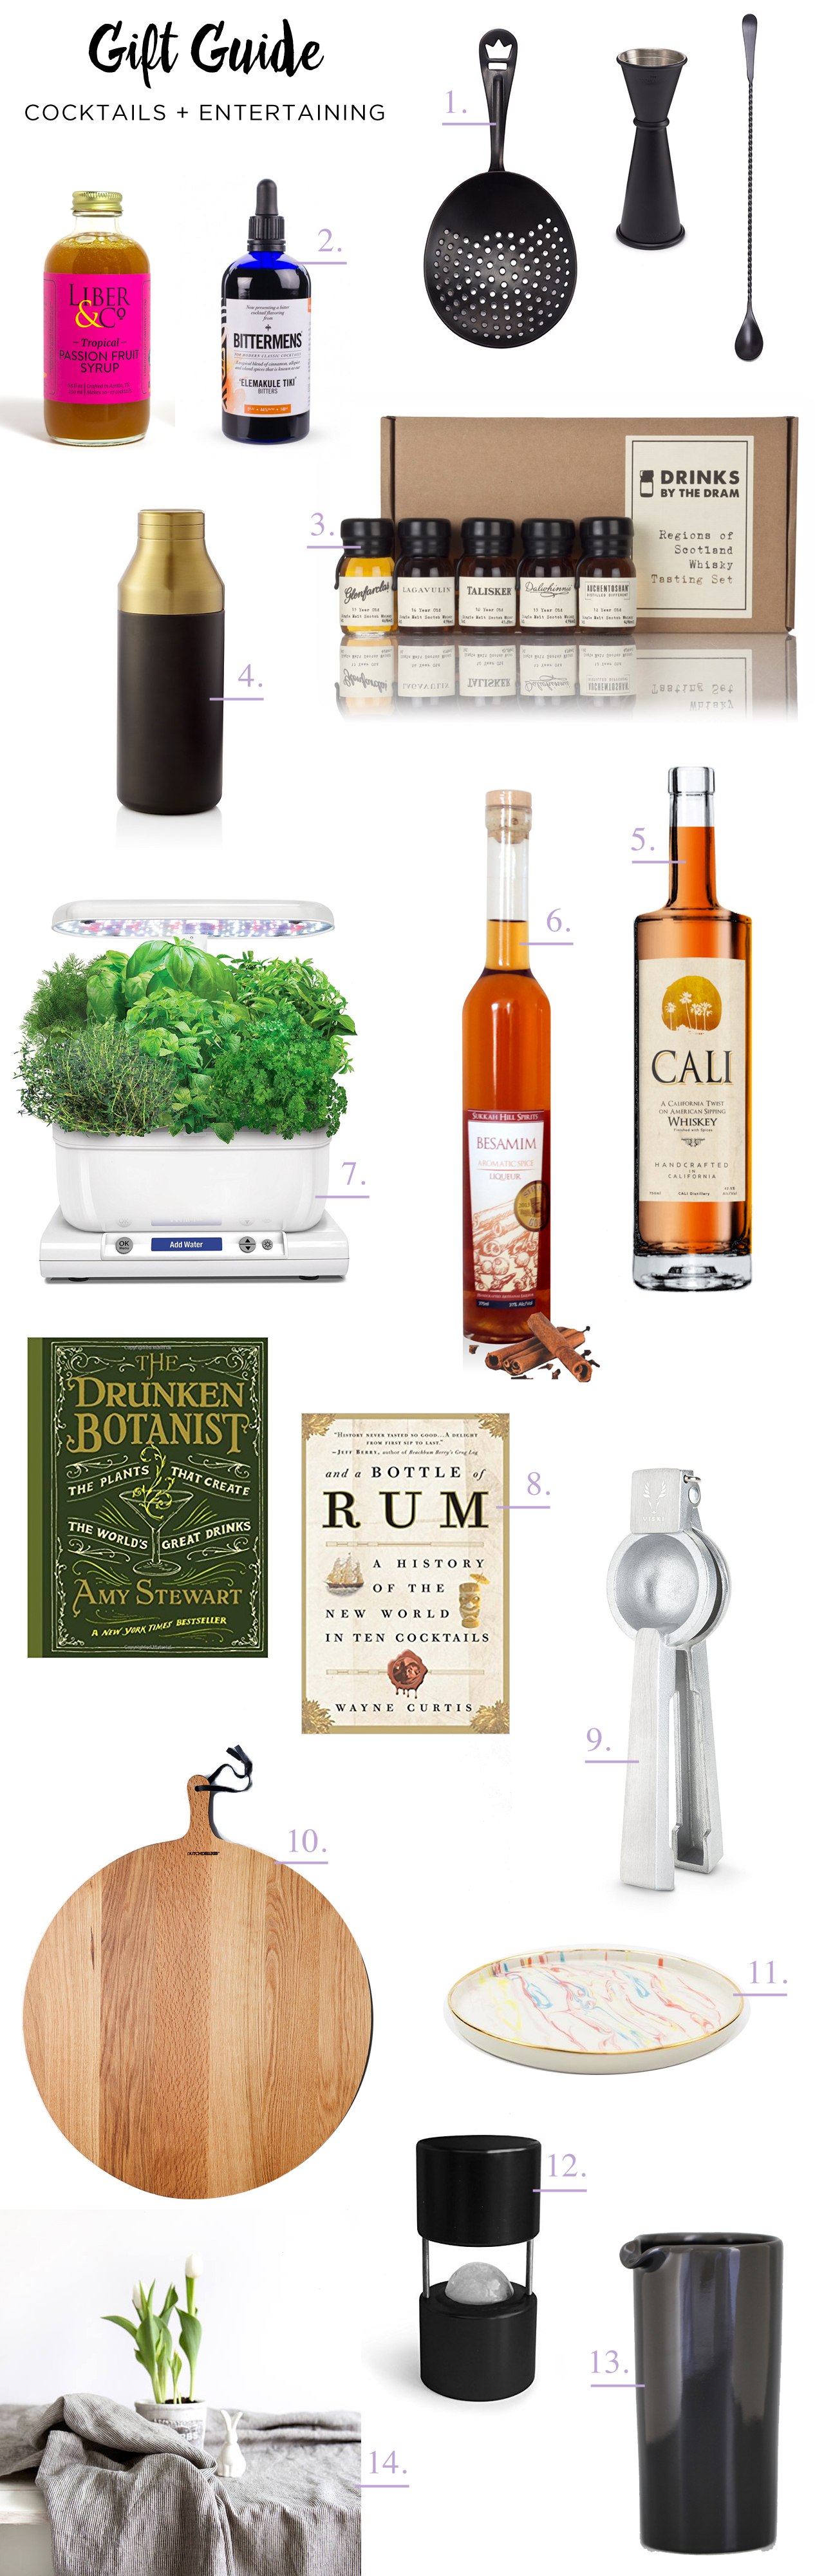 2017 Gift Guide: Cocktails and Entertaining